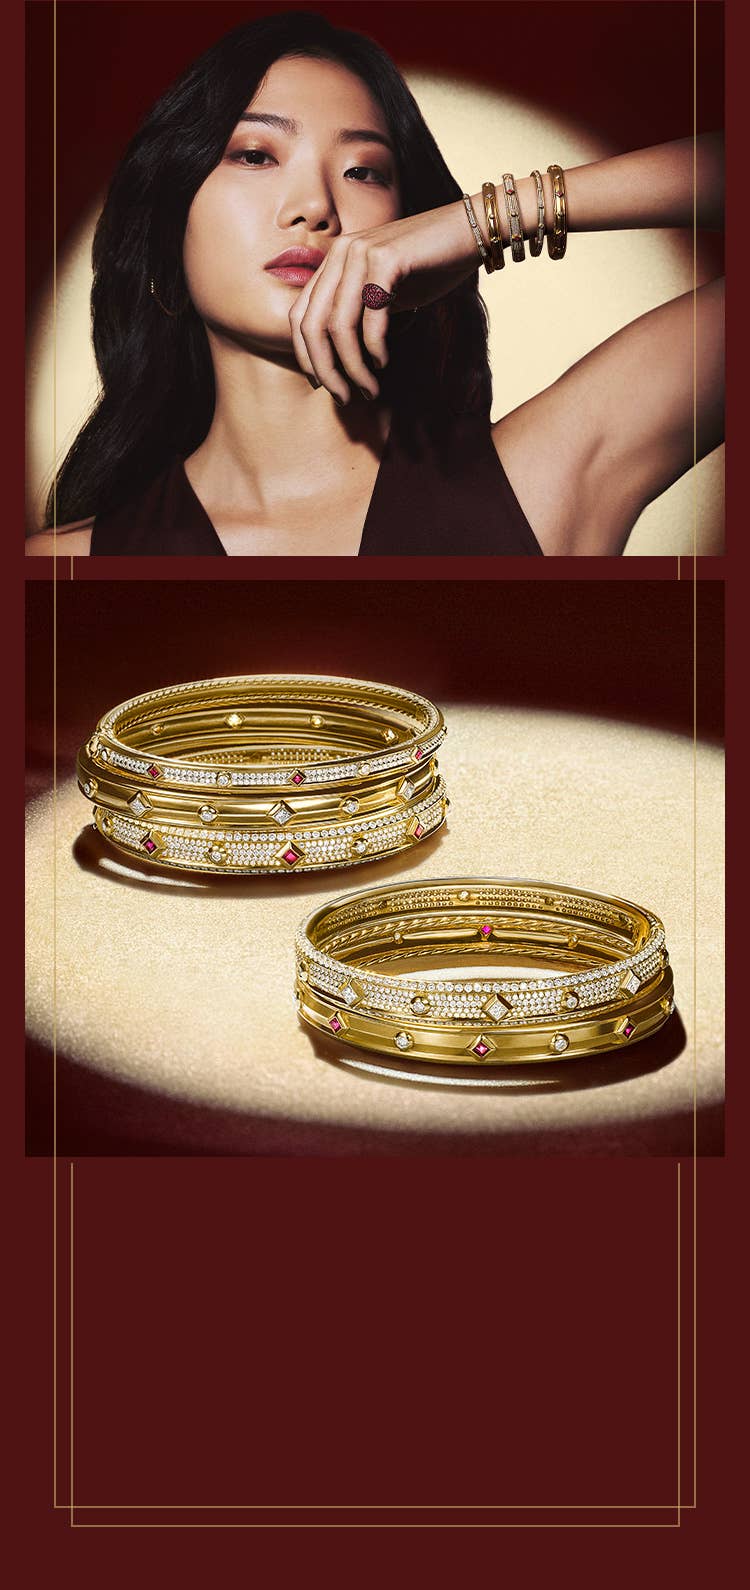 An image of gold modern renaissance bracelets and a female model wearing them with a ruby pinky ring.